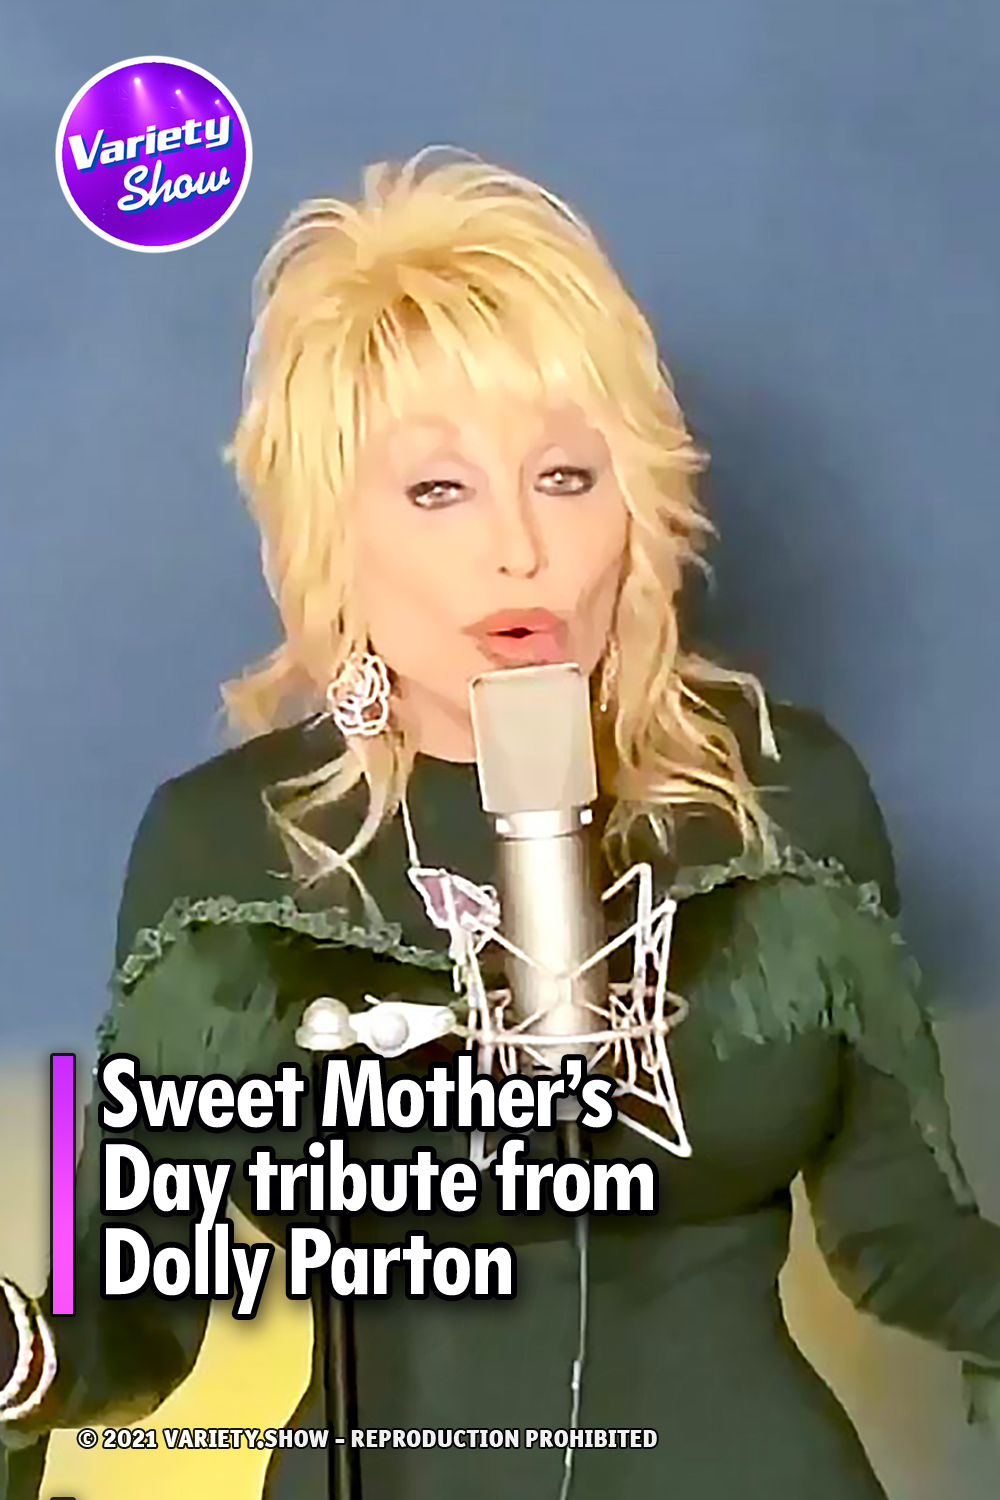 Sweet Mother’s Day tribute from Dolly Parton